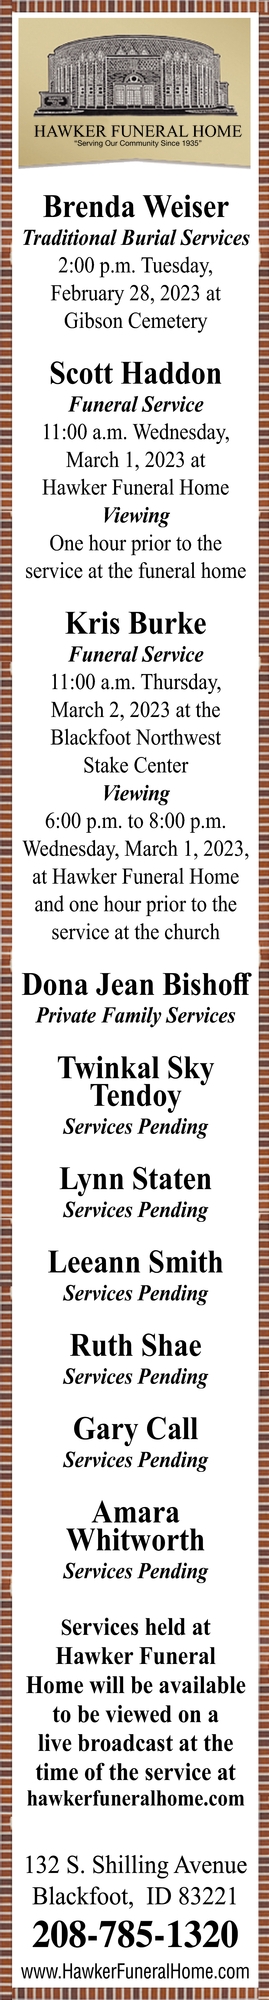 Traditional Burial Services